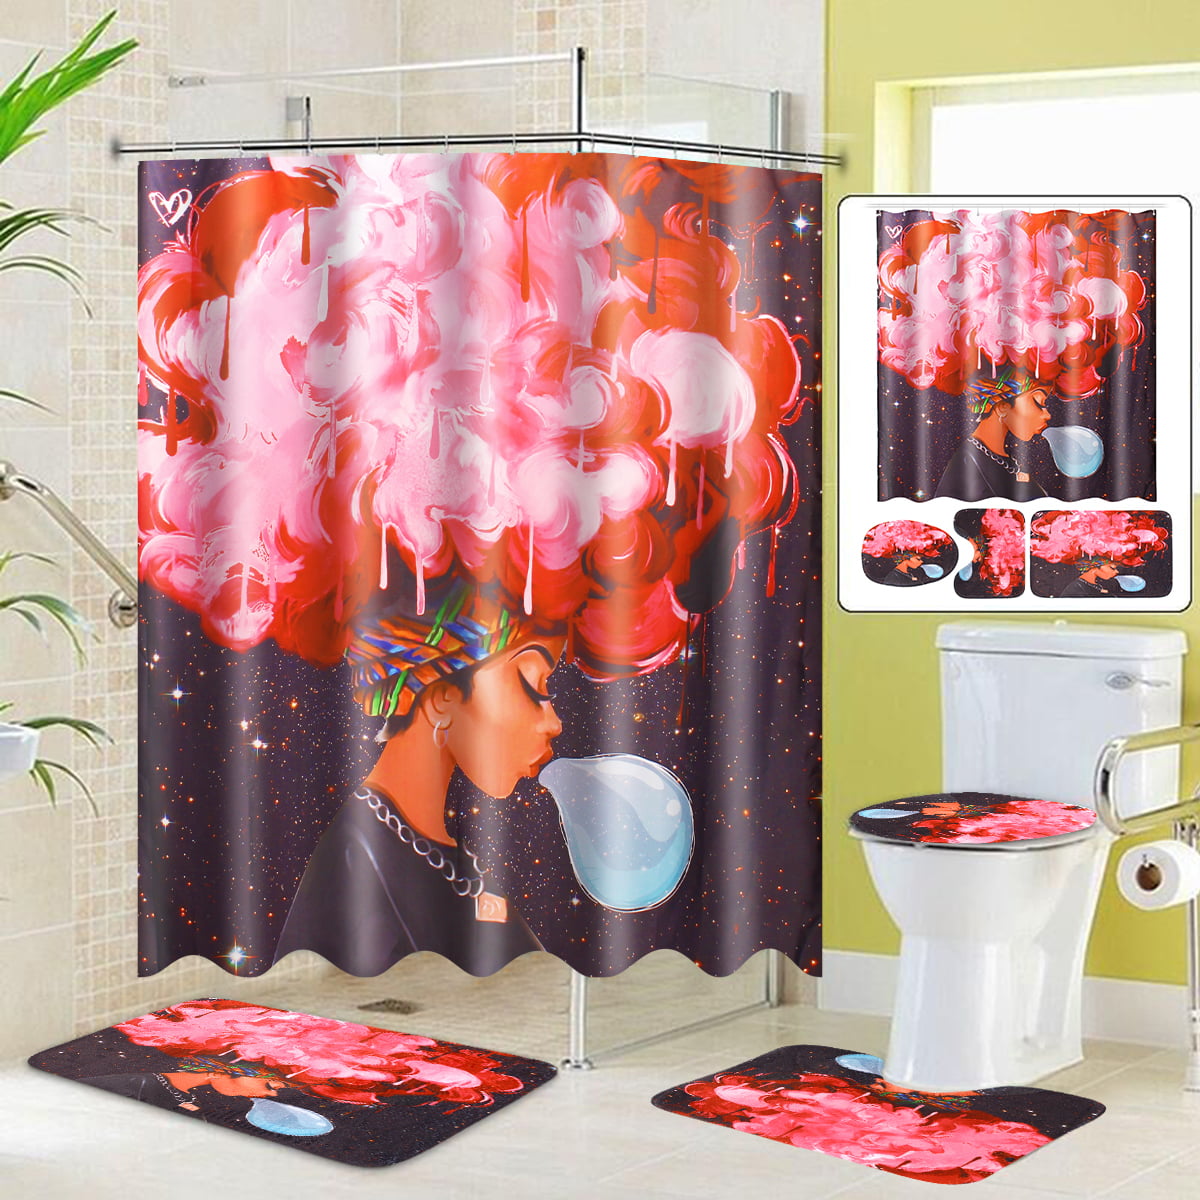 African Lion Fabric Shower Curtain Set Bathroom Decor with Hook Washable 71"x71" 